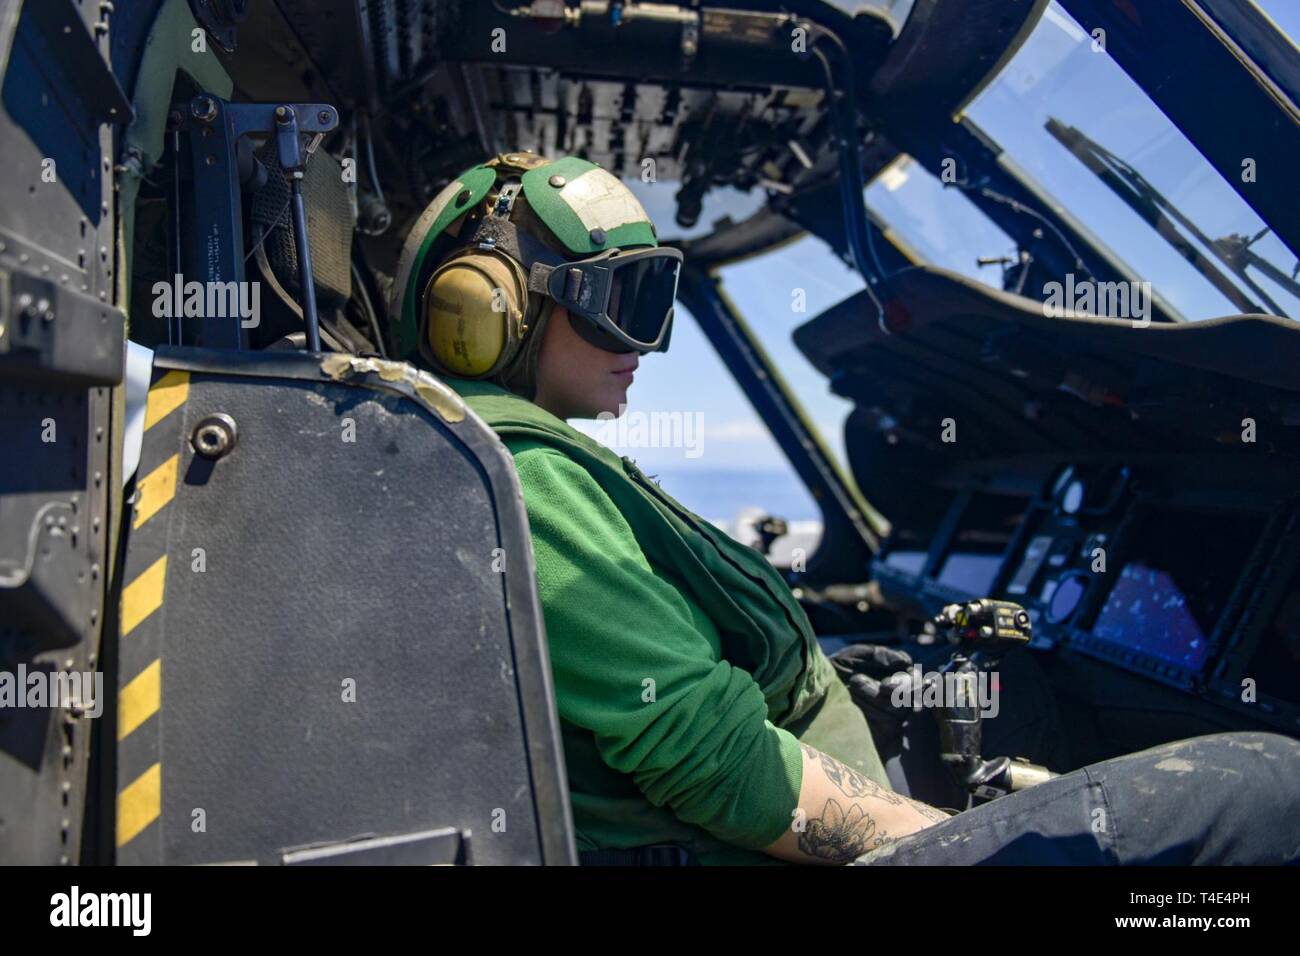 SOUTH CHINA SEA (March 29, 2019) -  Airman Alexandra Lucas, from Greensborough, N.C., prepares to taxi an MH-60S Sea Hawk assigned to Helicopter Sea Combat Squadron (HSC) 25 on the amphibious assault ship USS Wasp (LHD 1). Wasp, flagship of Wasp Amphibious Ready Group, is operating in the Indo-Pacific region to enhance interoperability with partners and serve as a lethal, ready-response force for any type of contingency. Stock Photo